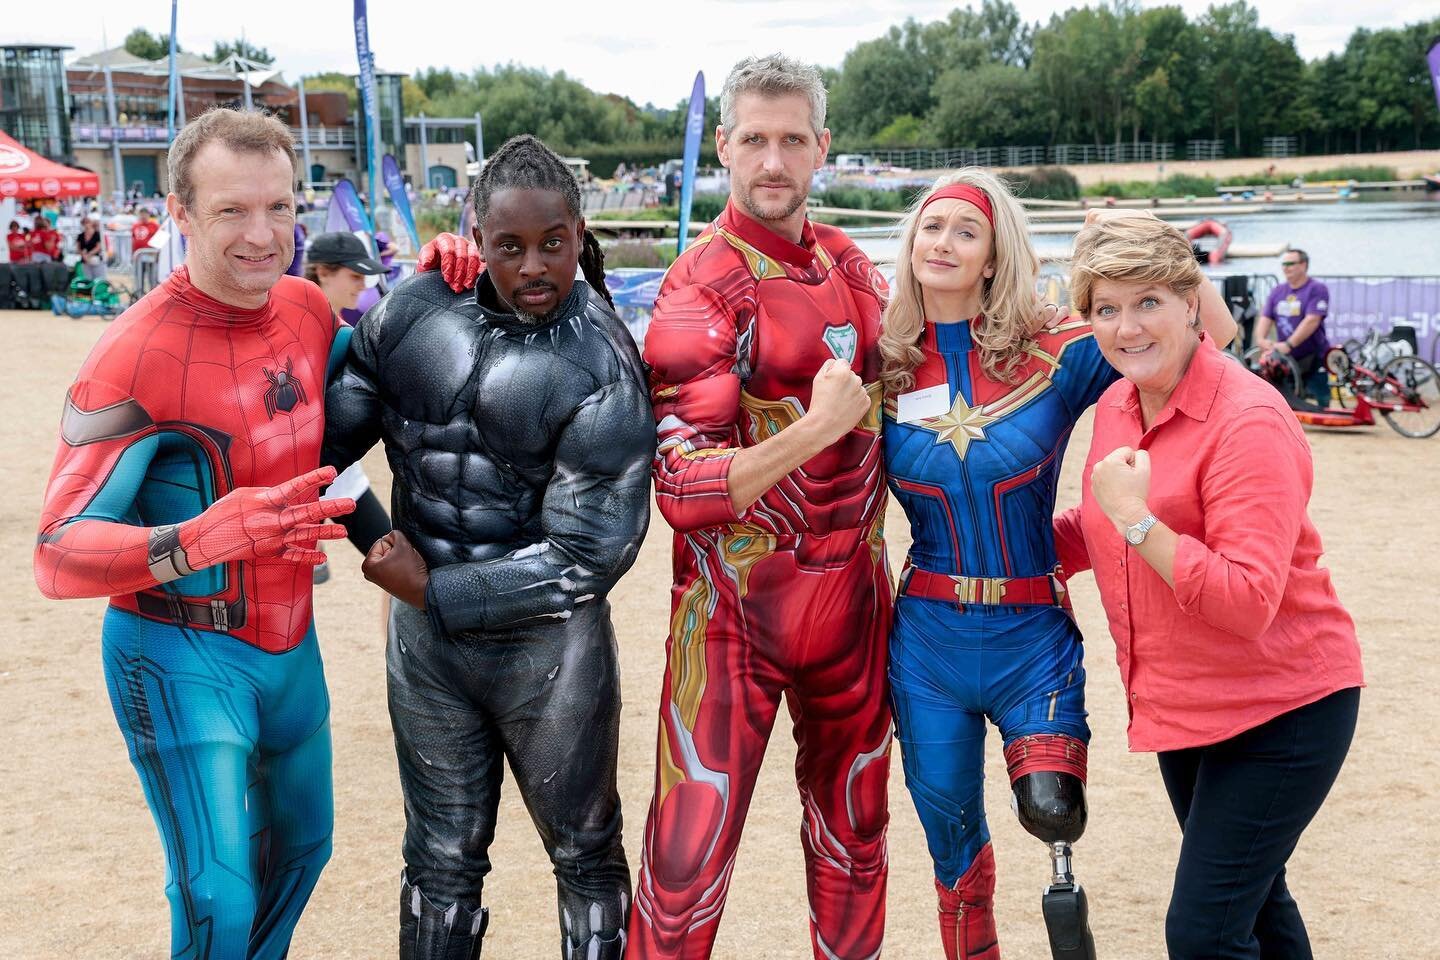 POW!💥 What an absolute epic weekend at the 2022 @superhero_series ⚡️🫶🏻

Wonderful to see so many incredible and inspirational people come together for the biggest mass participation triathlon event for those with disabilities - powered by @marvel 